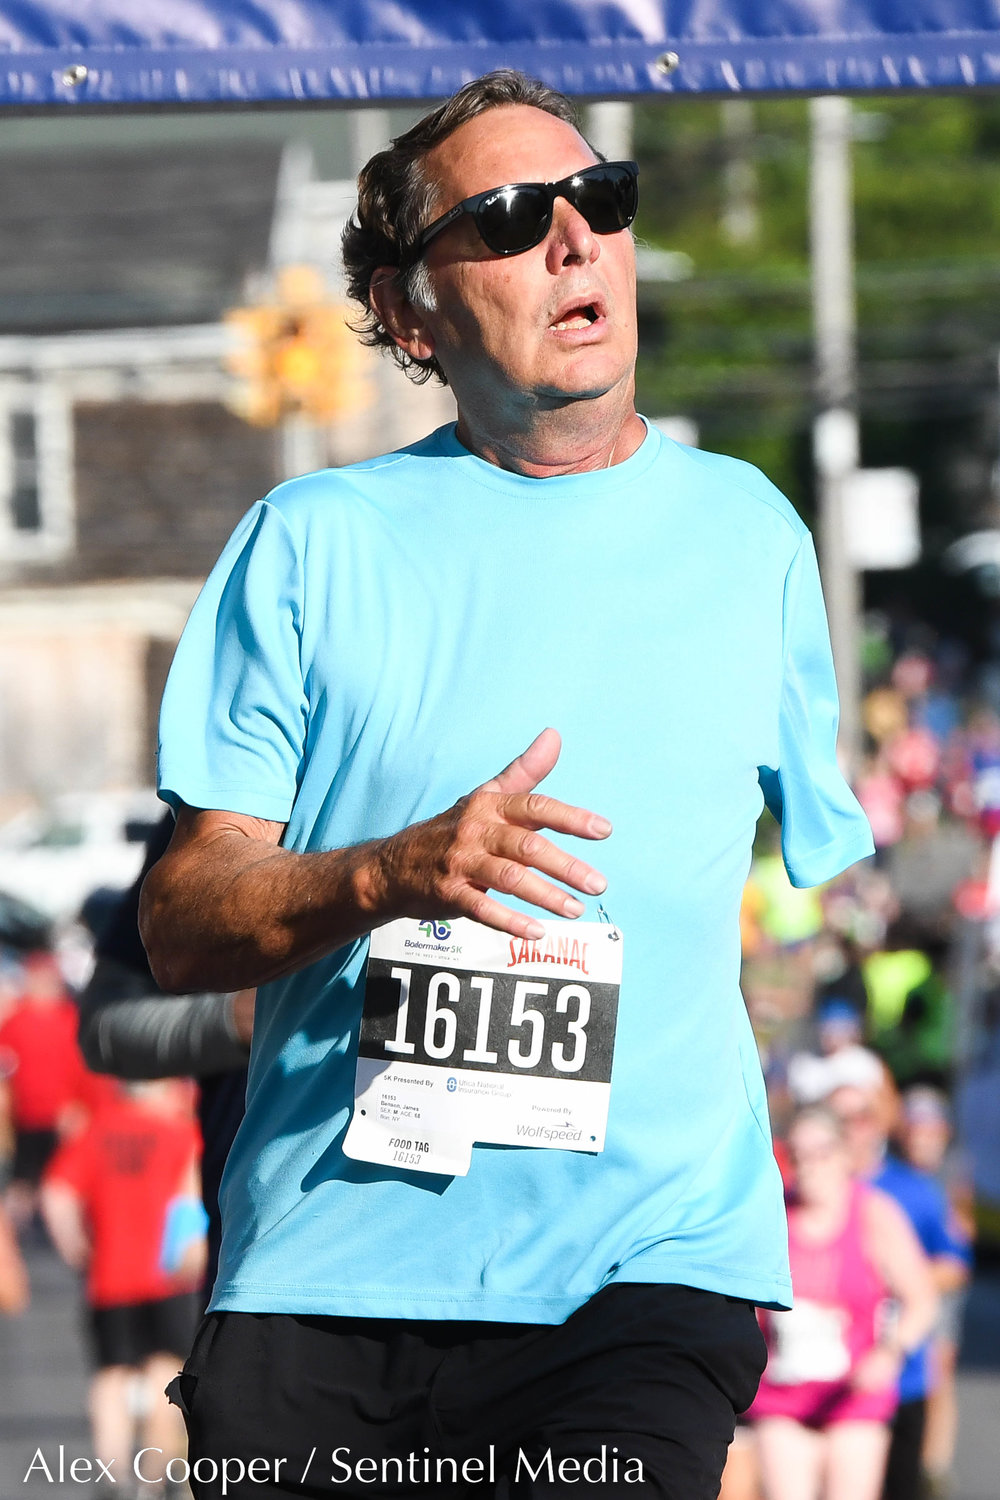 5K runners make their way to the finish line during the 45th Boilermaker Road Race on Sunday.